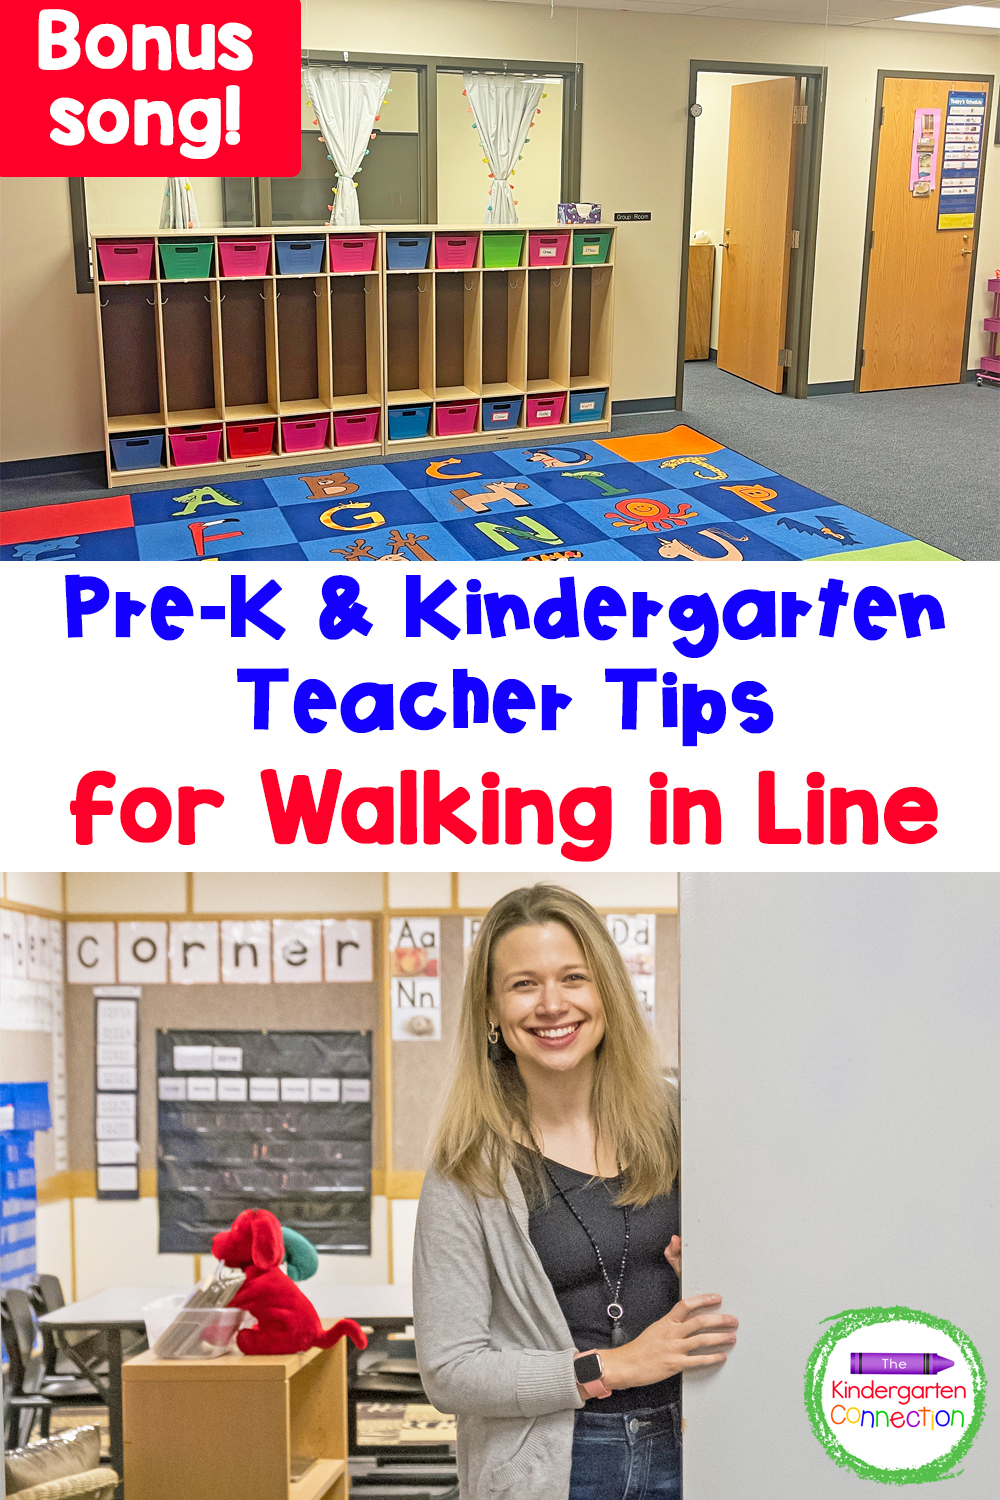 Check out these EFFECTIVE teacher tips for walking in line and make travel time with your students less stressful and more fun!